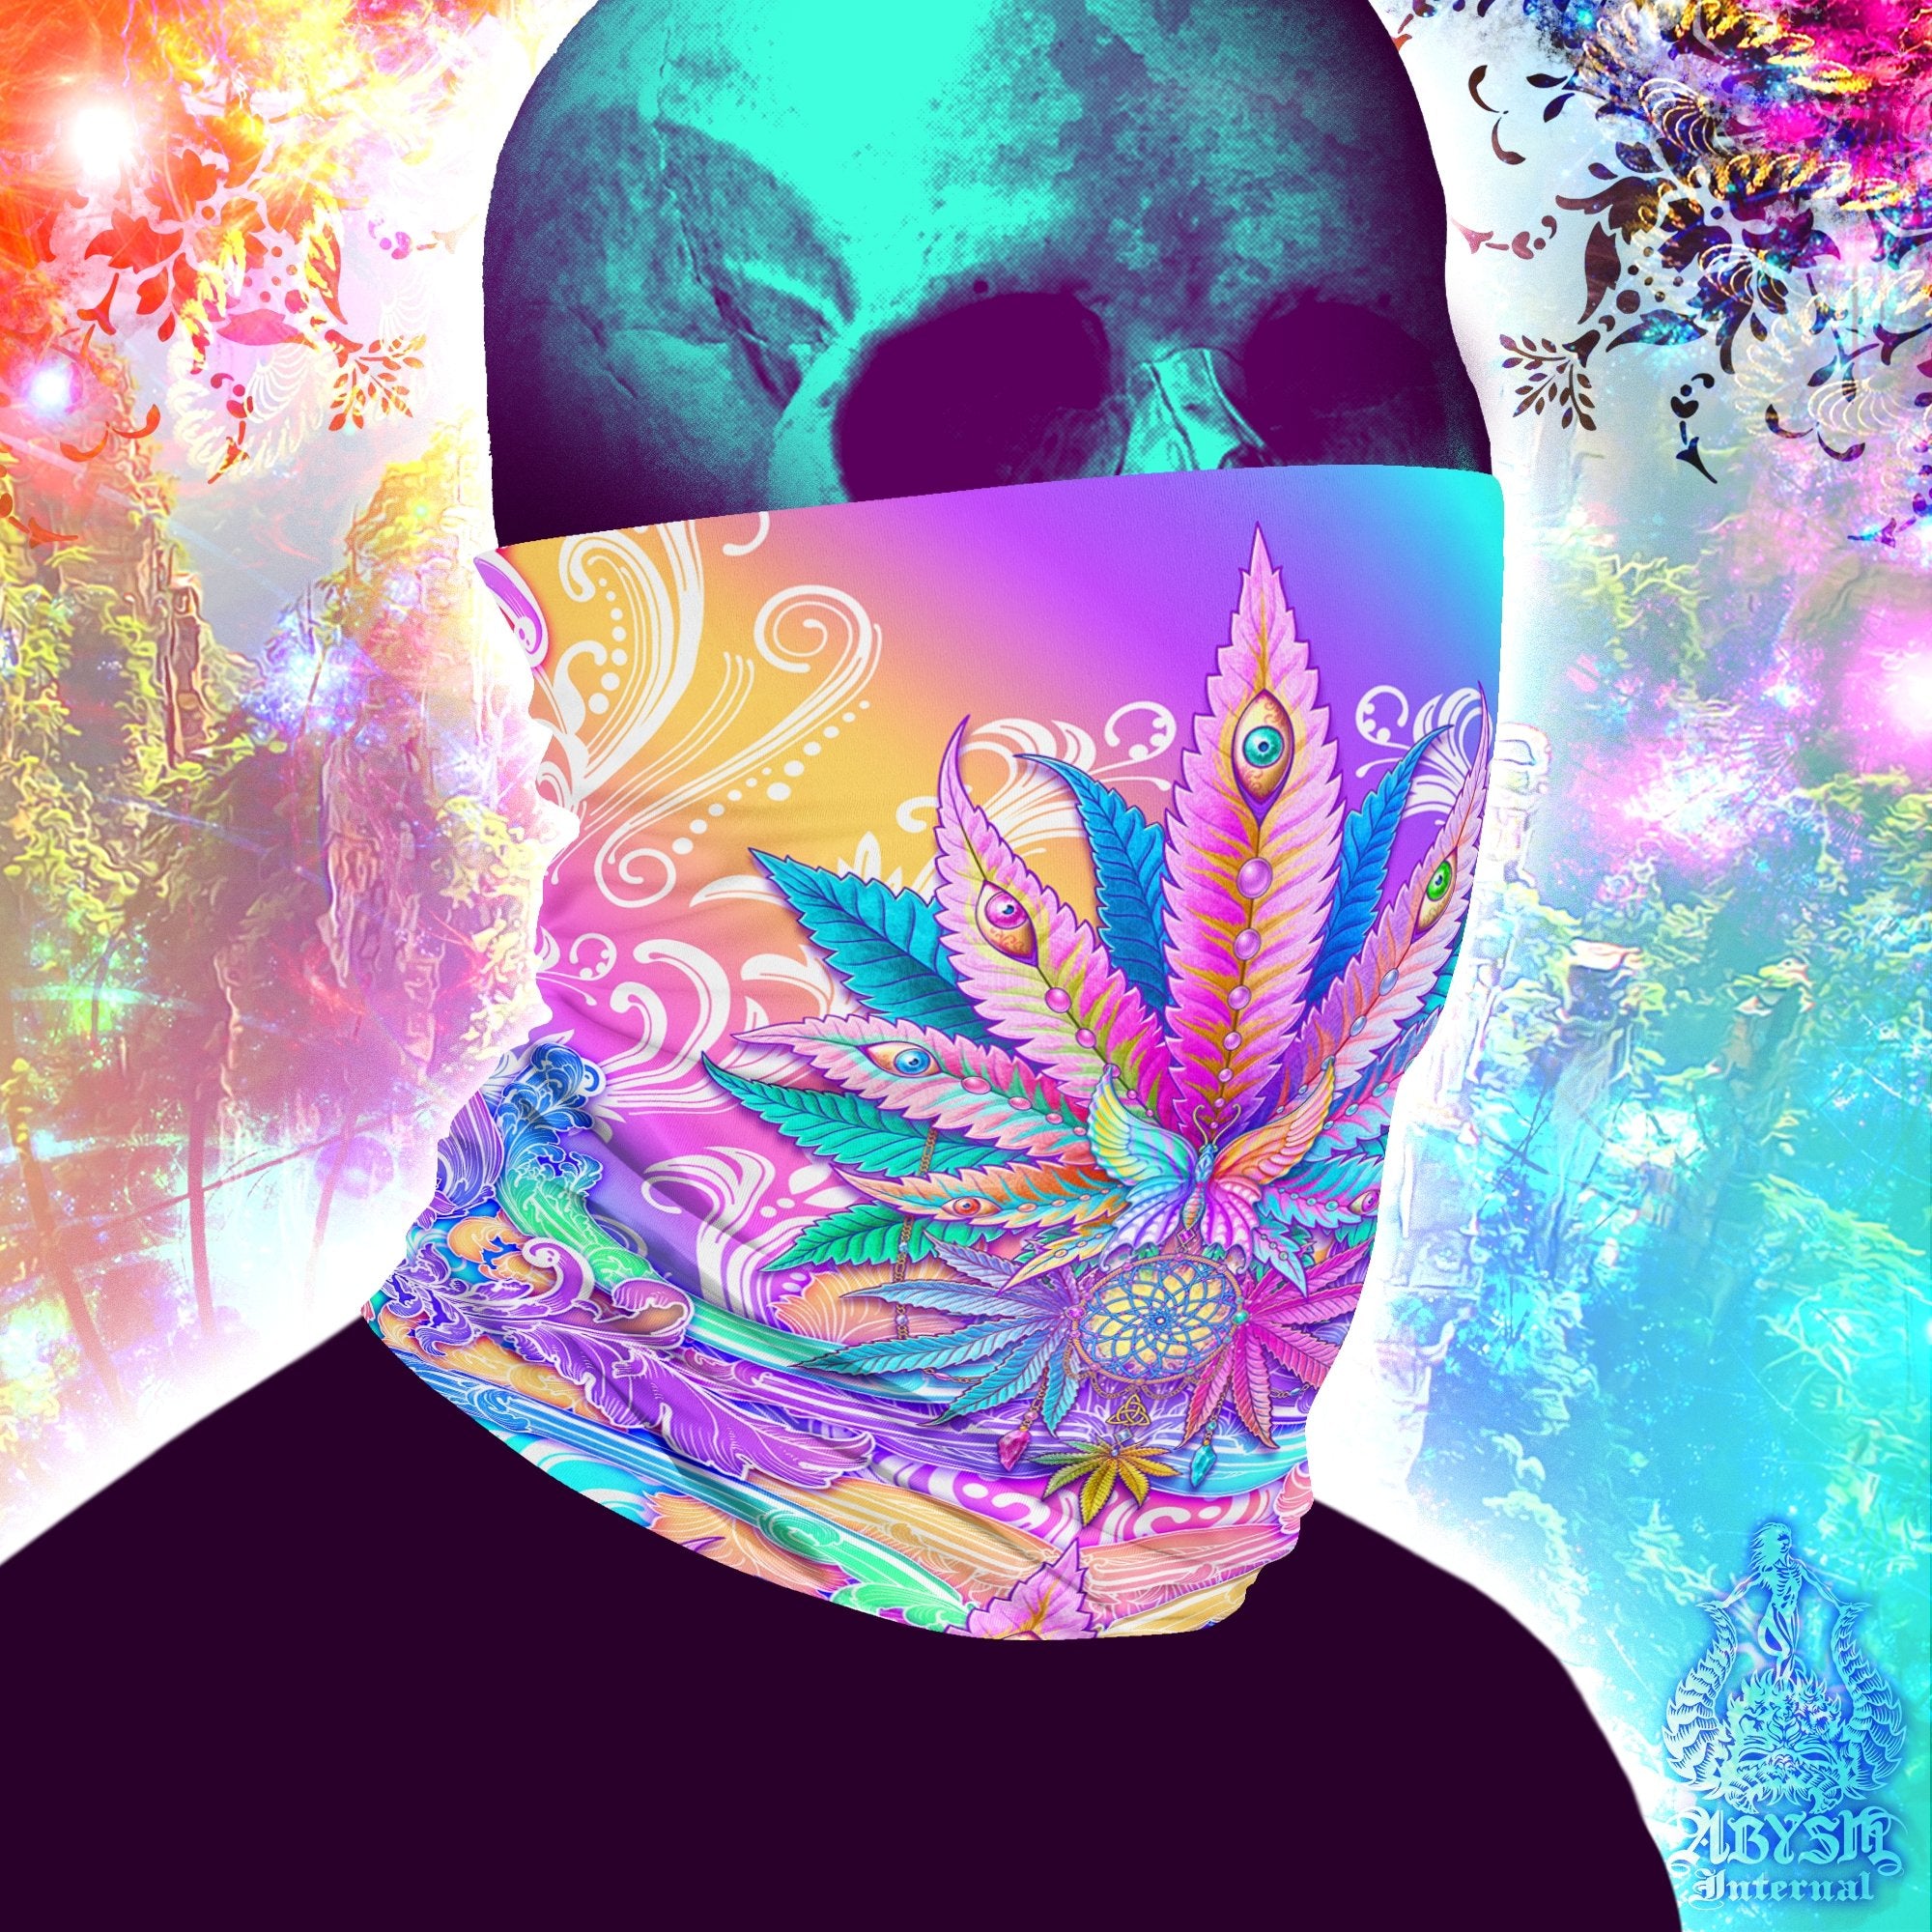 Pink Weed Neck Gaiter, Cannabis Face Mask, Pastel Marijuana Head Covering, Psychedelic Festival Outfit, 420 Gift - Aesthetic - Abysm Internal